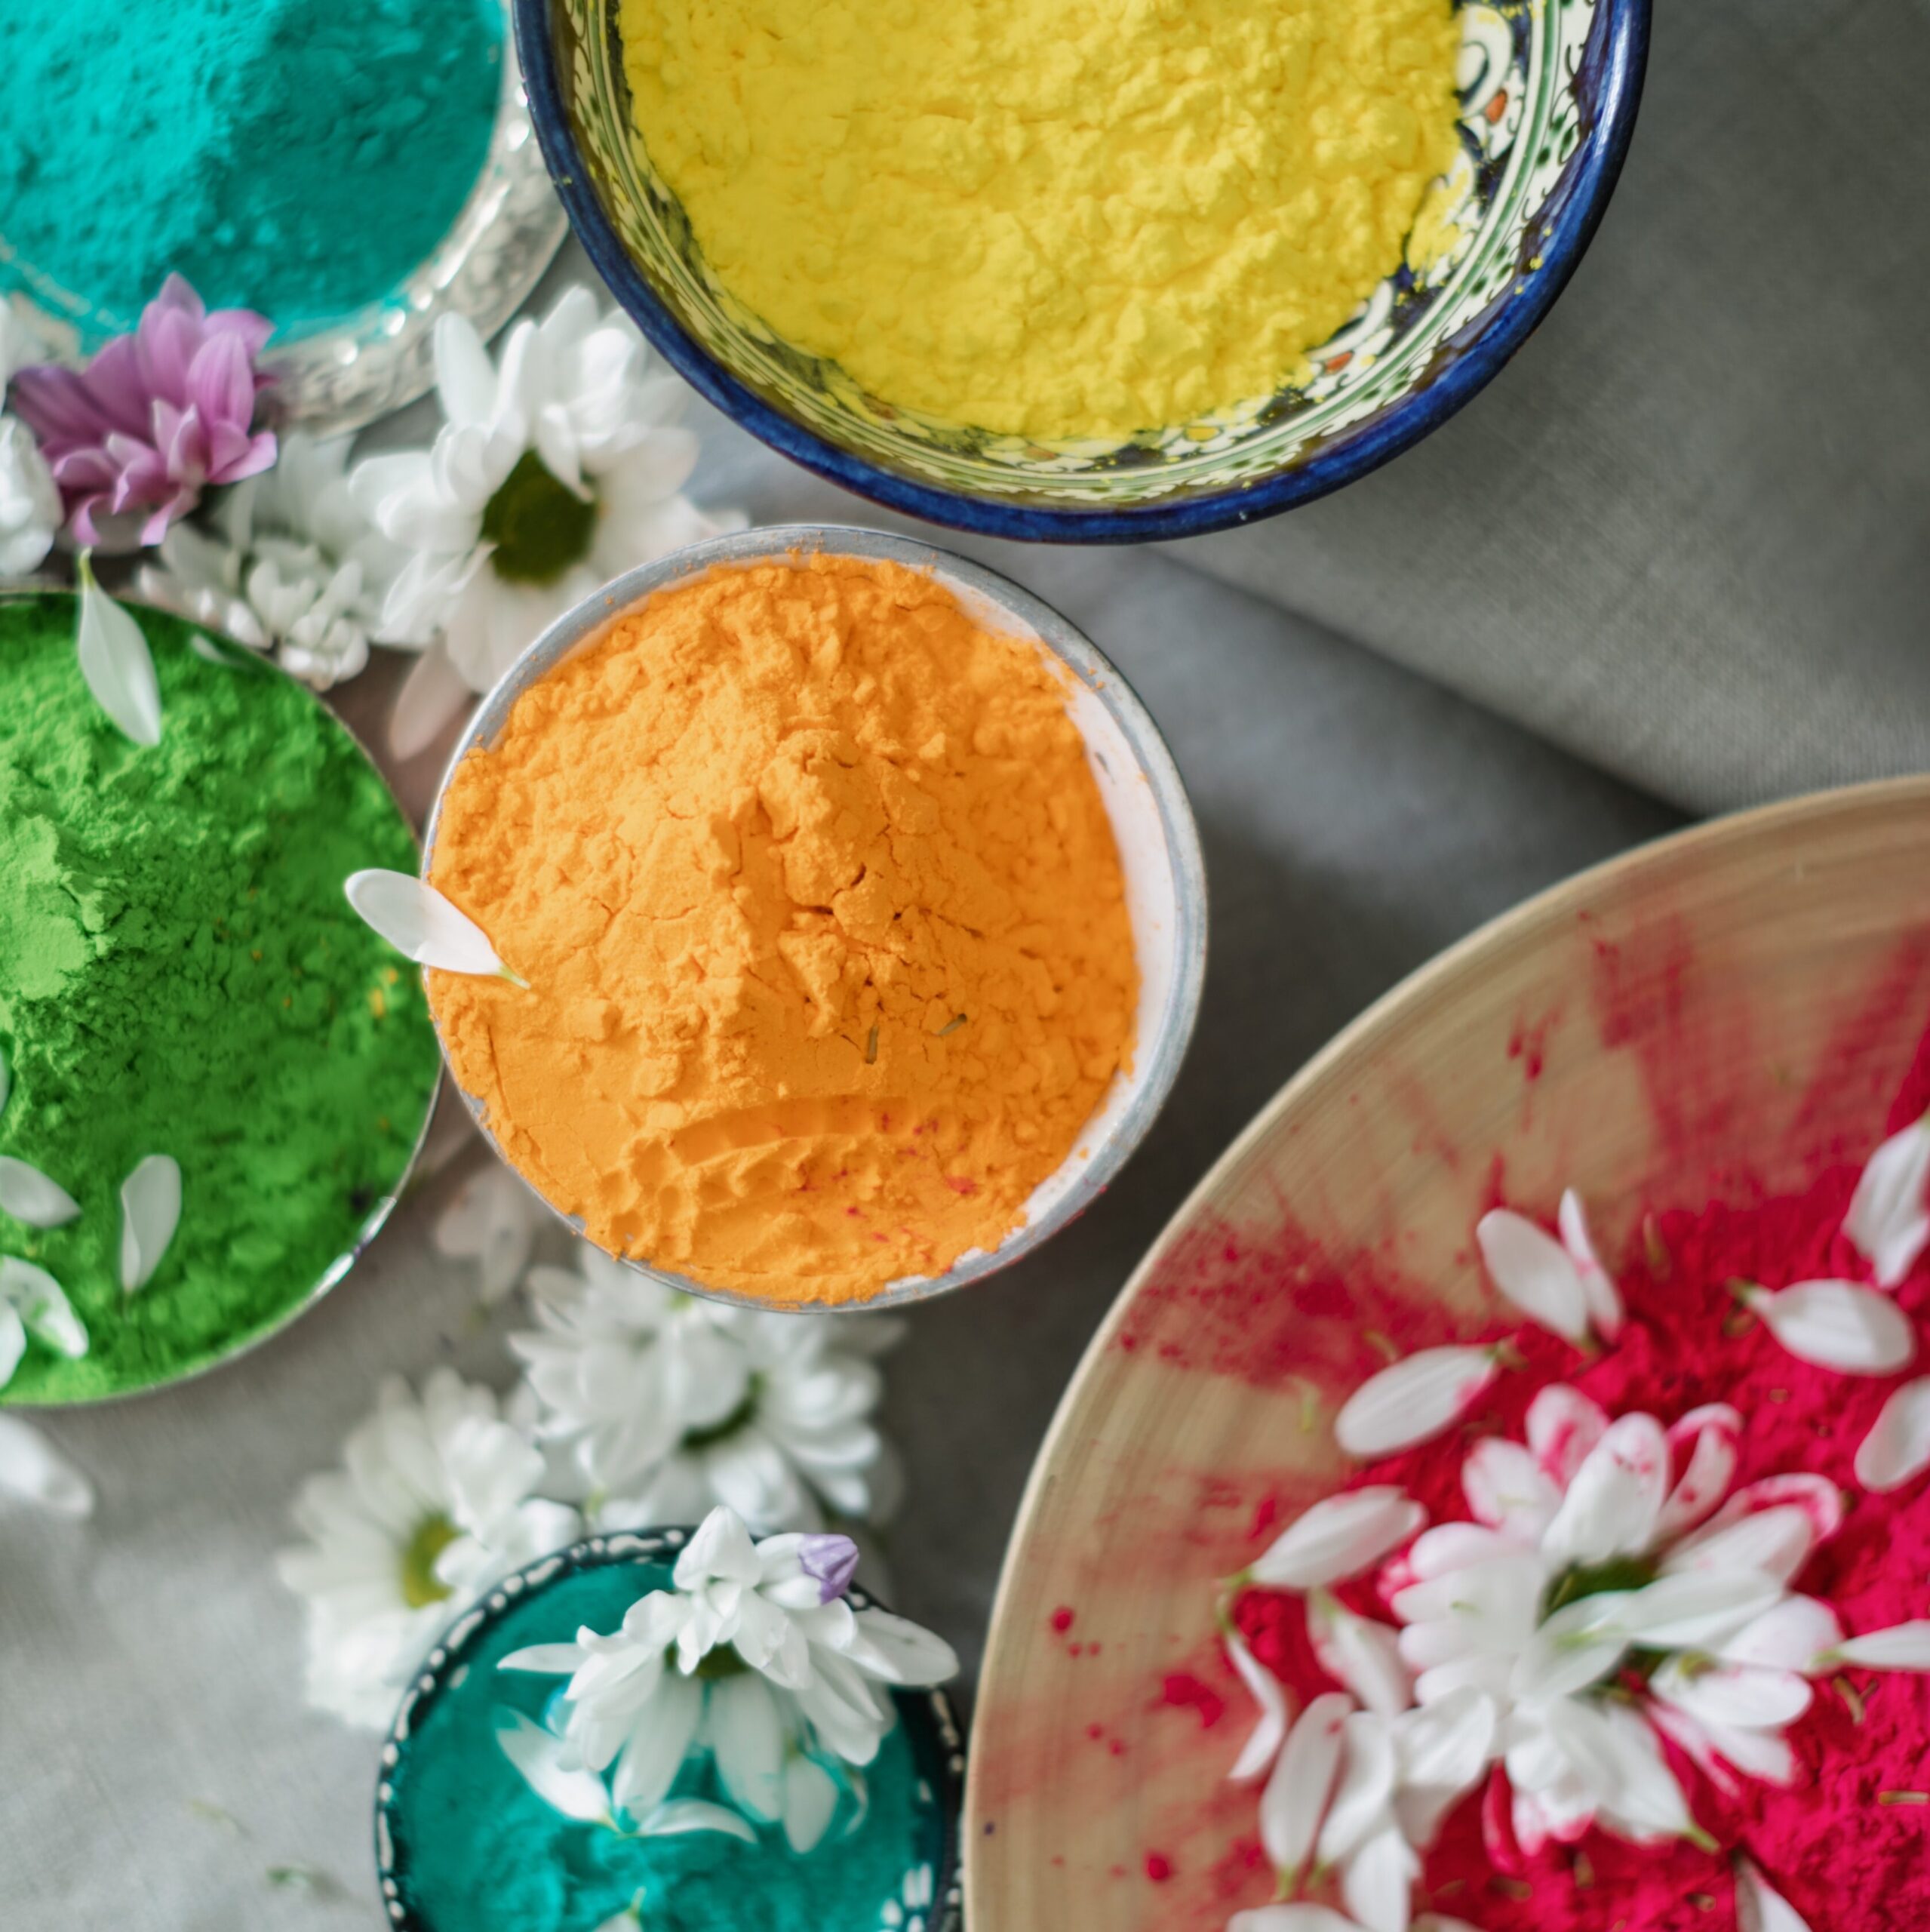 Celebrating Holi with natural colors made from flowers and vegetables